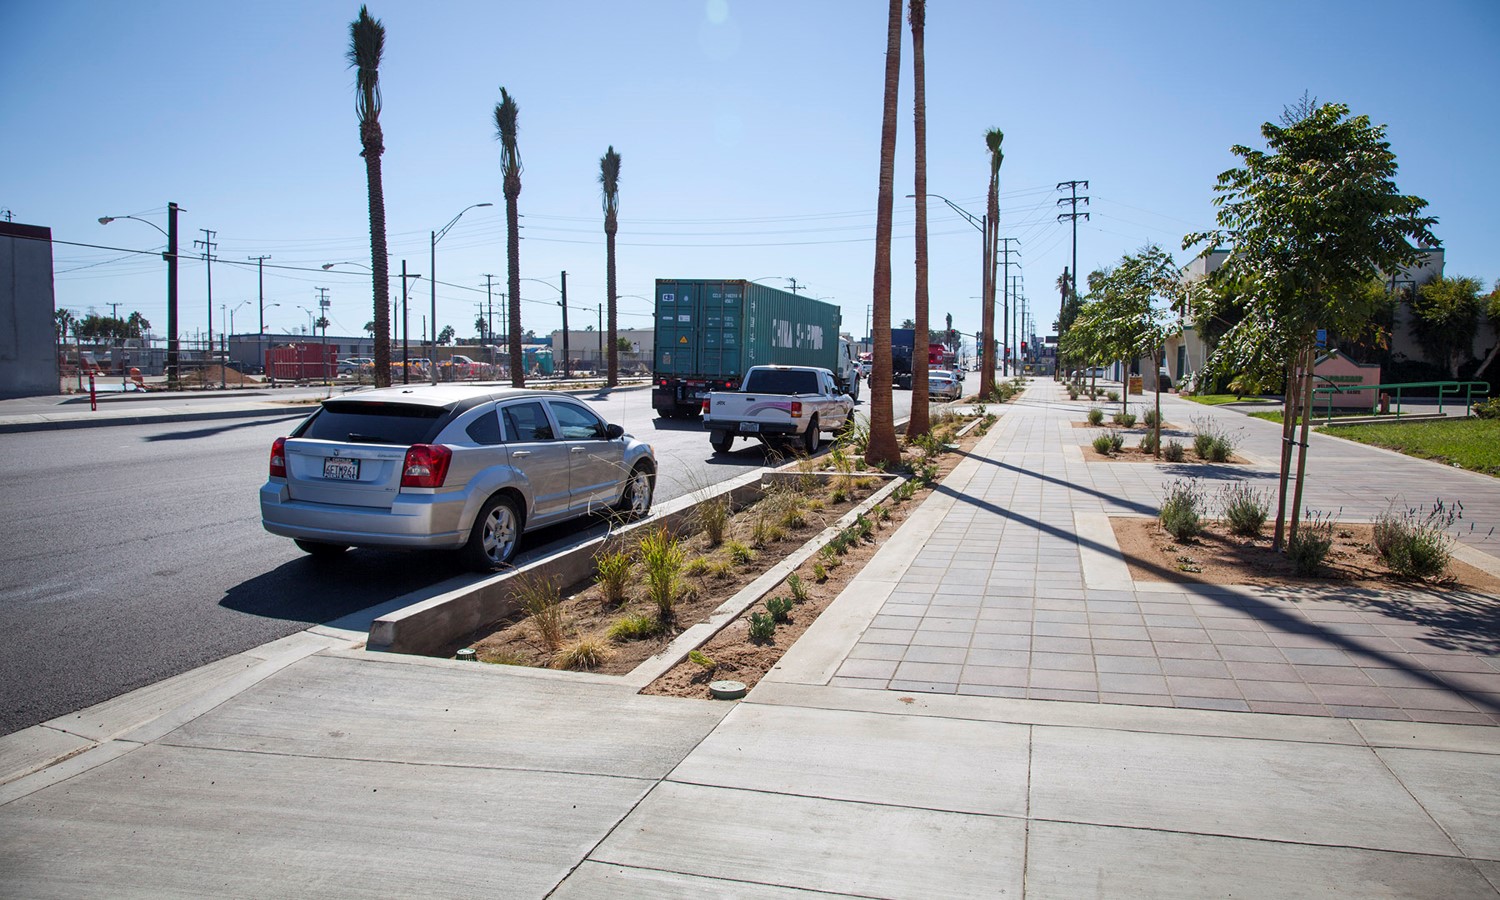 Anaheim Green Street with bioswales, permeable pavers, and drought-tolerant landscaping. Image by Port of Long Beach